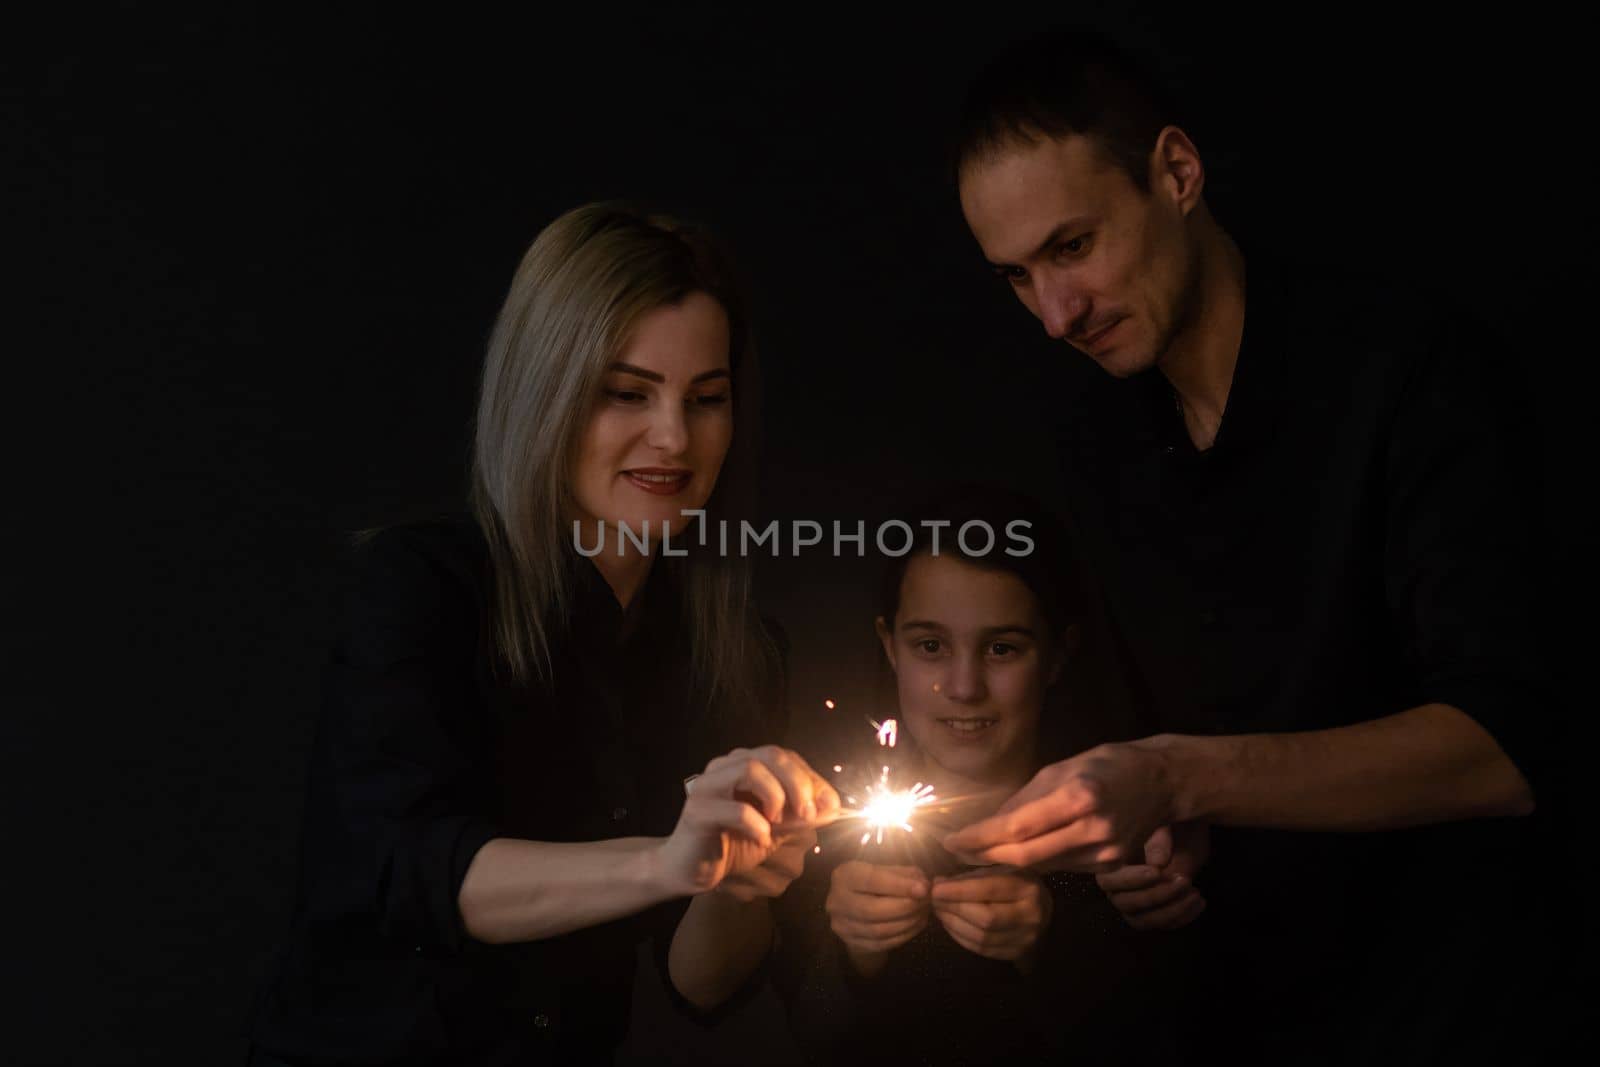 Young family with sparklers at Christmas time on a black background by Andelov13